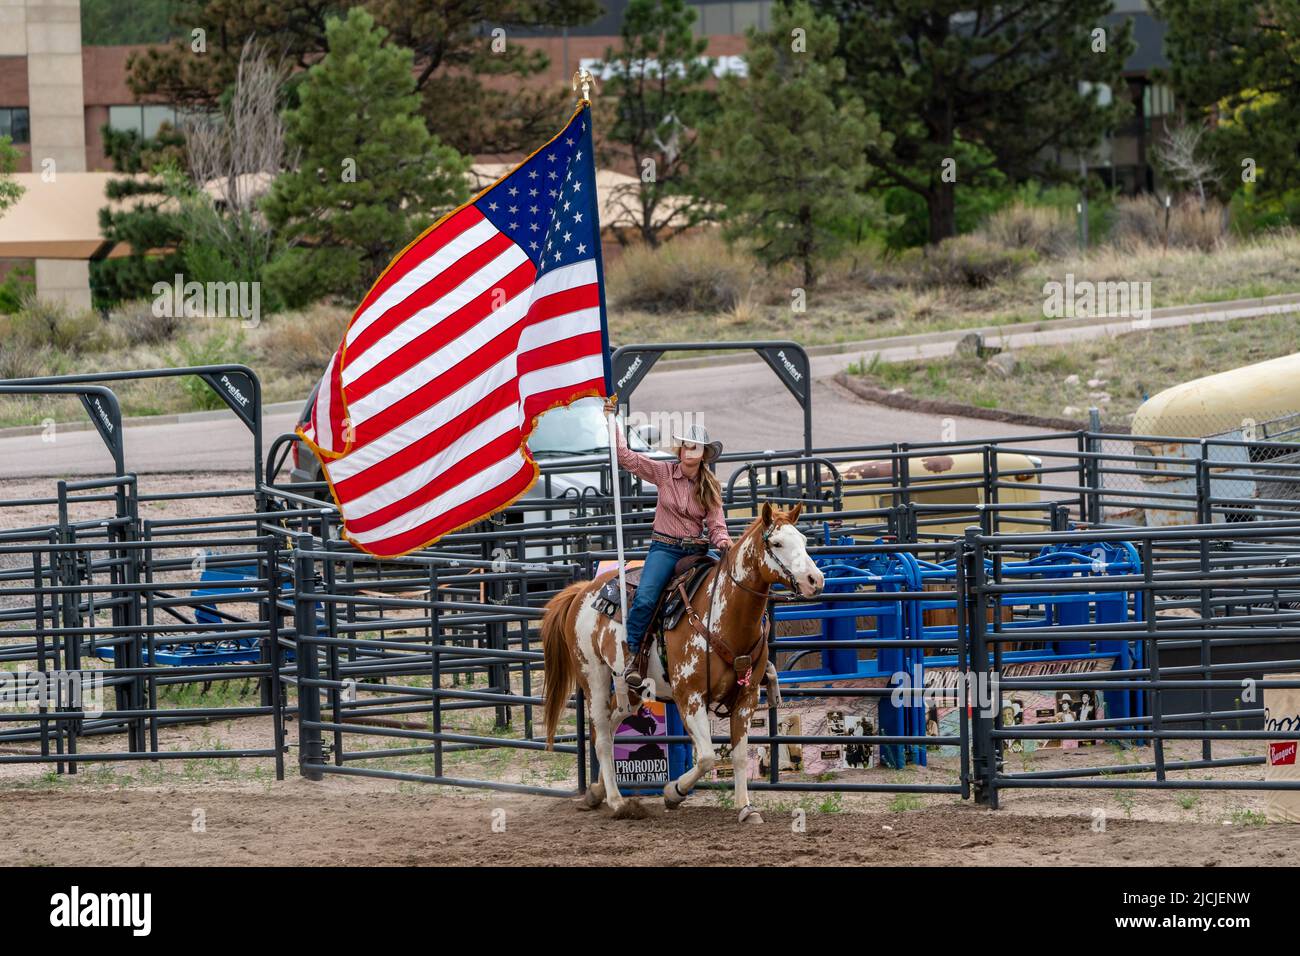 Rodeo in Colorado Springs, Colorado starts with the National Anthem and the U.S. Flag Stock Photo